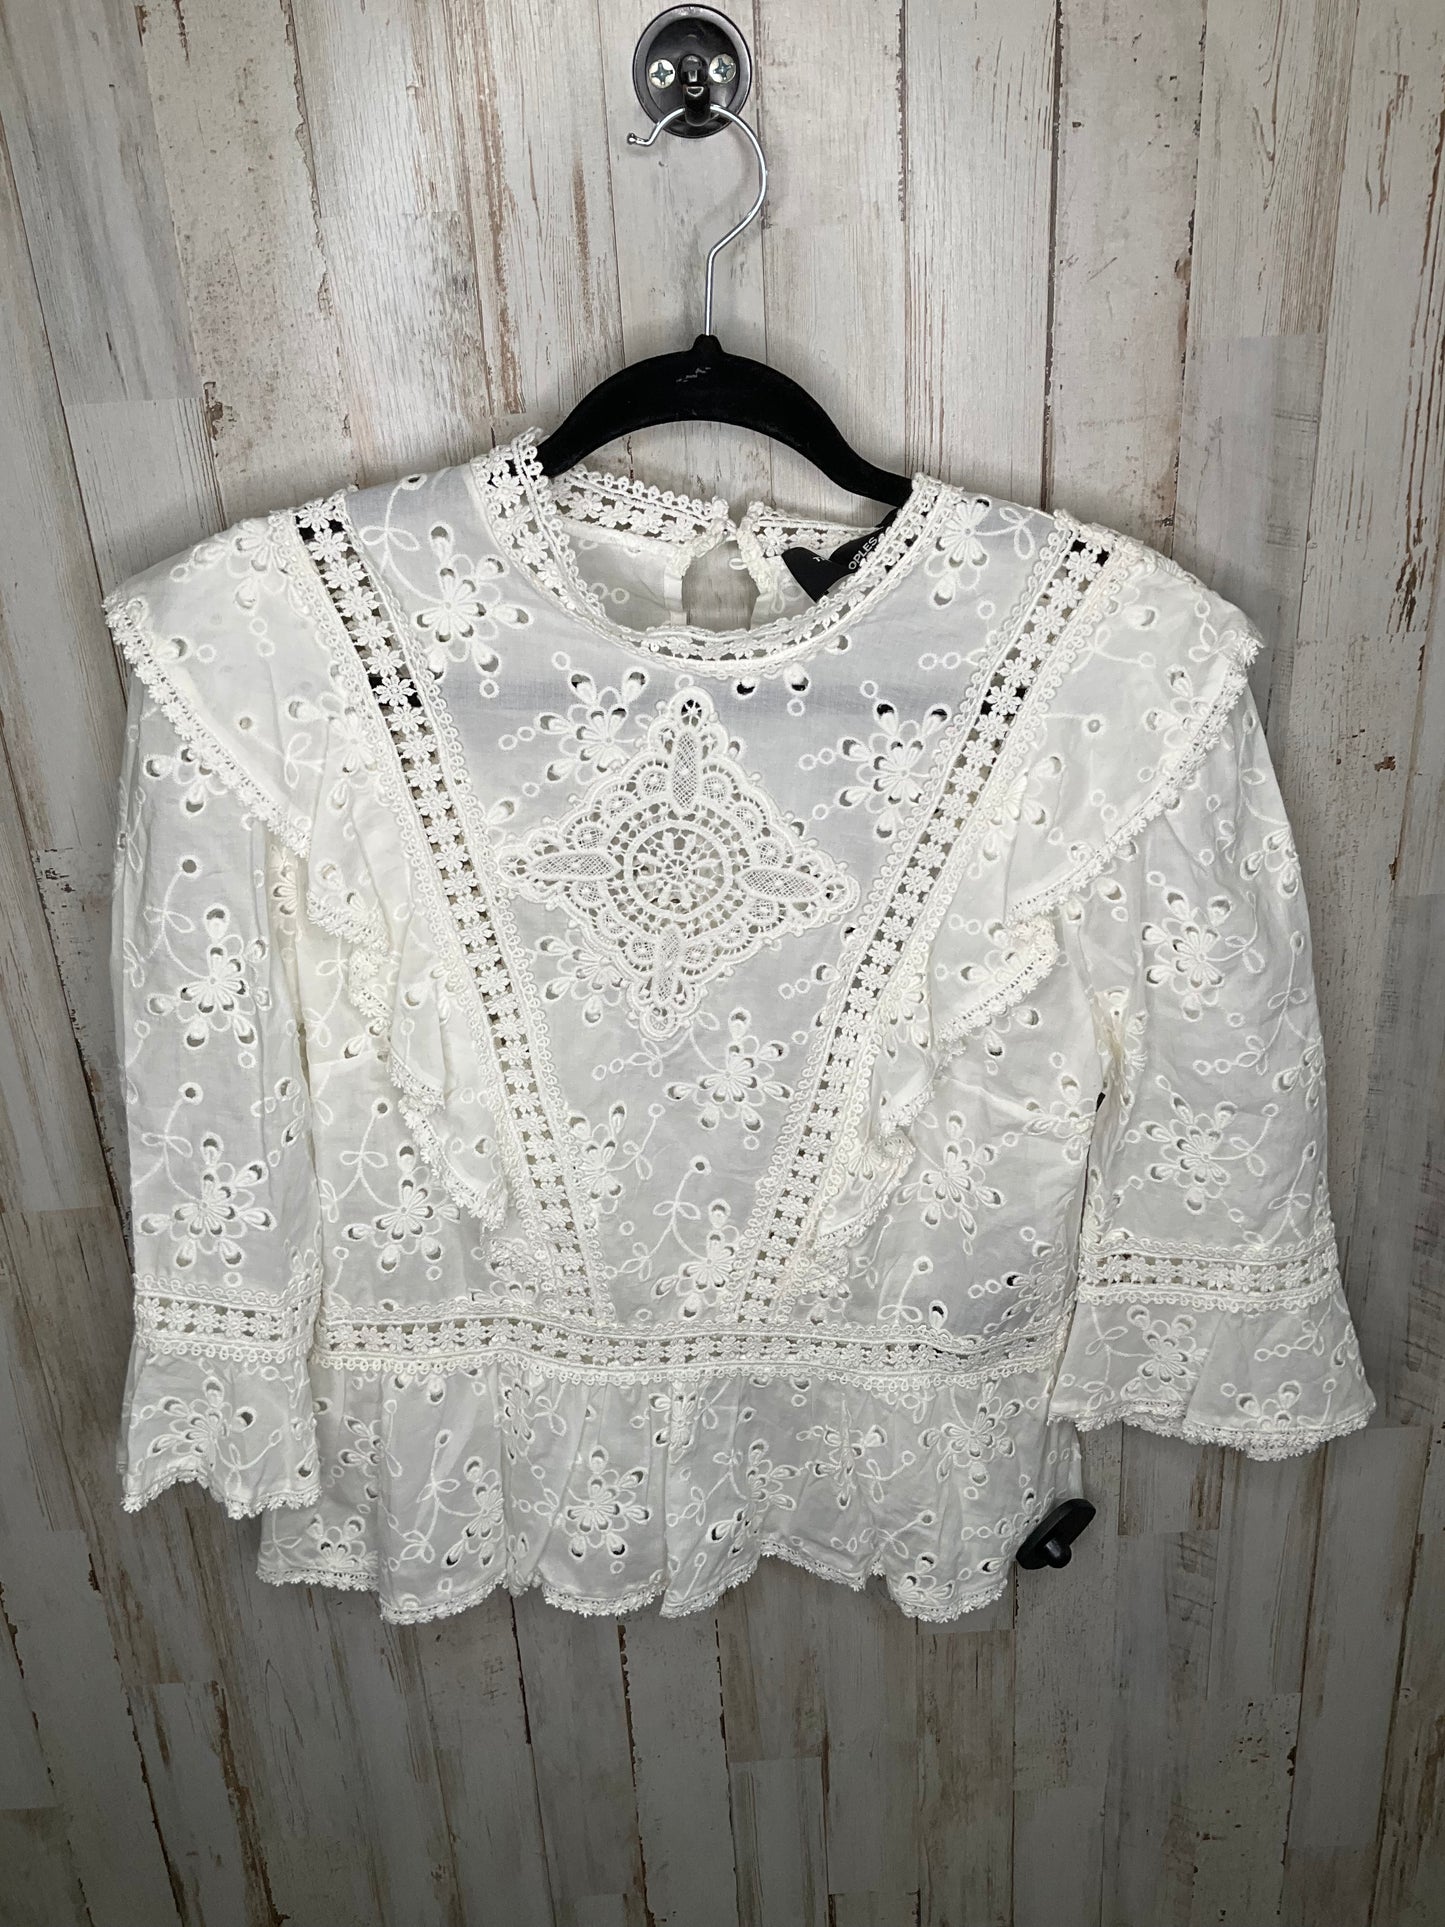 White Top 3/4 Sleeve Cma, Size L